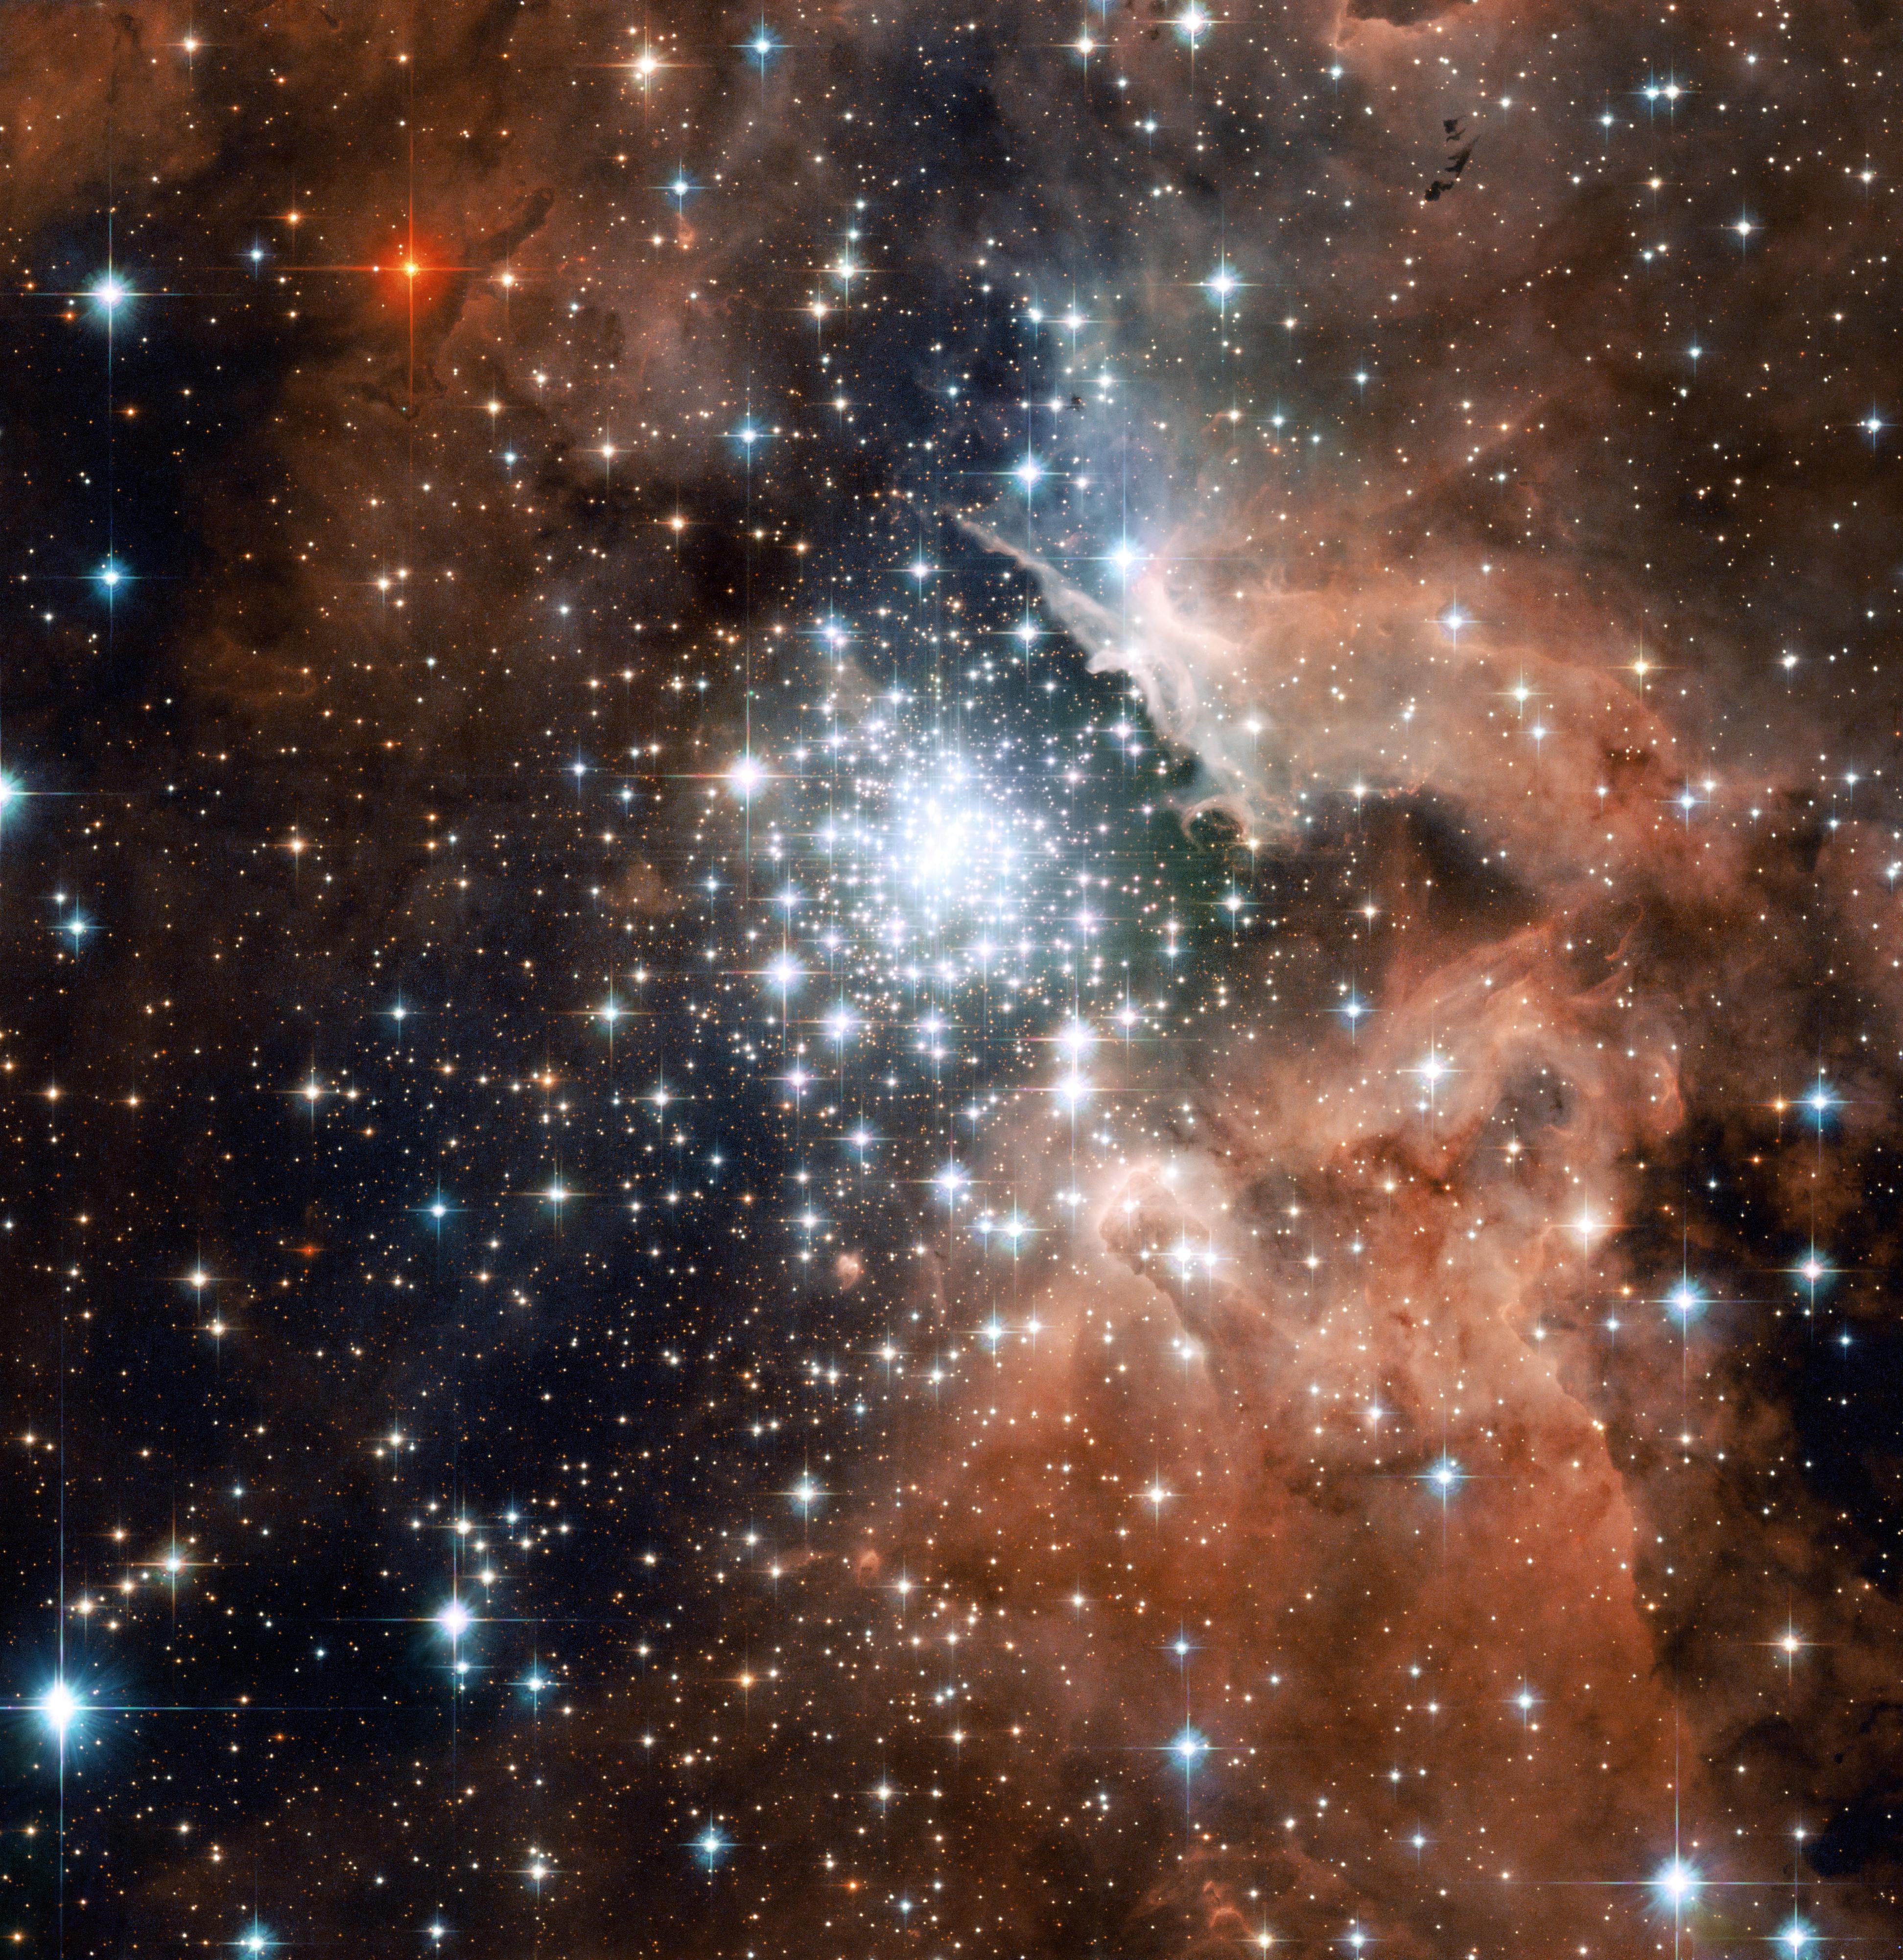 Large cluster of stars in the center of the image, surrounded by red dust and gas.